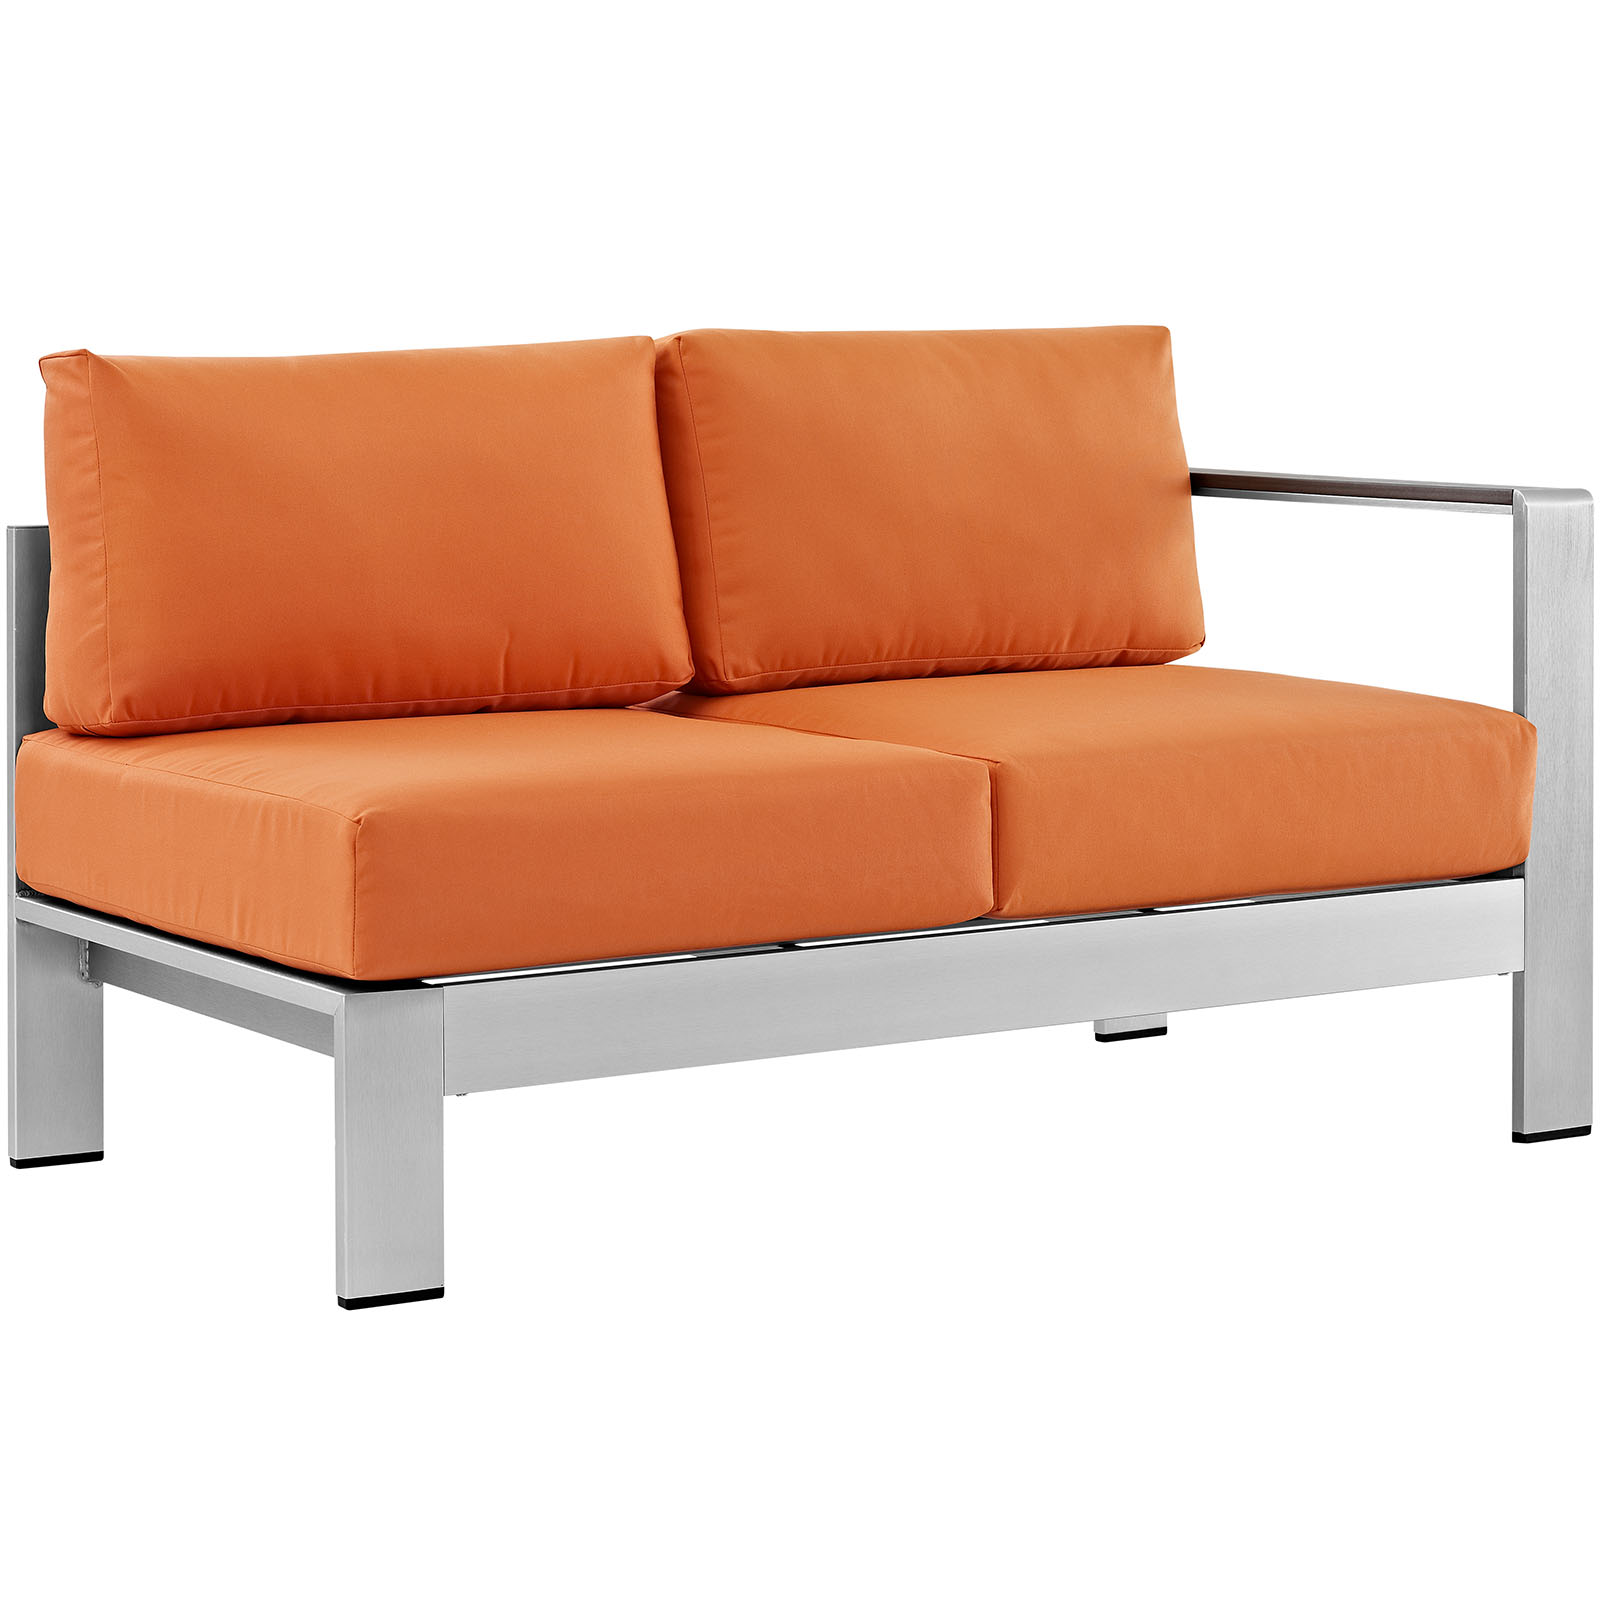 Modway Shore 6 Piece Outdoor Patio Aluminum Sectional Sofa Set in Silver Orange - image 4 of 8